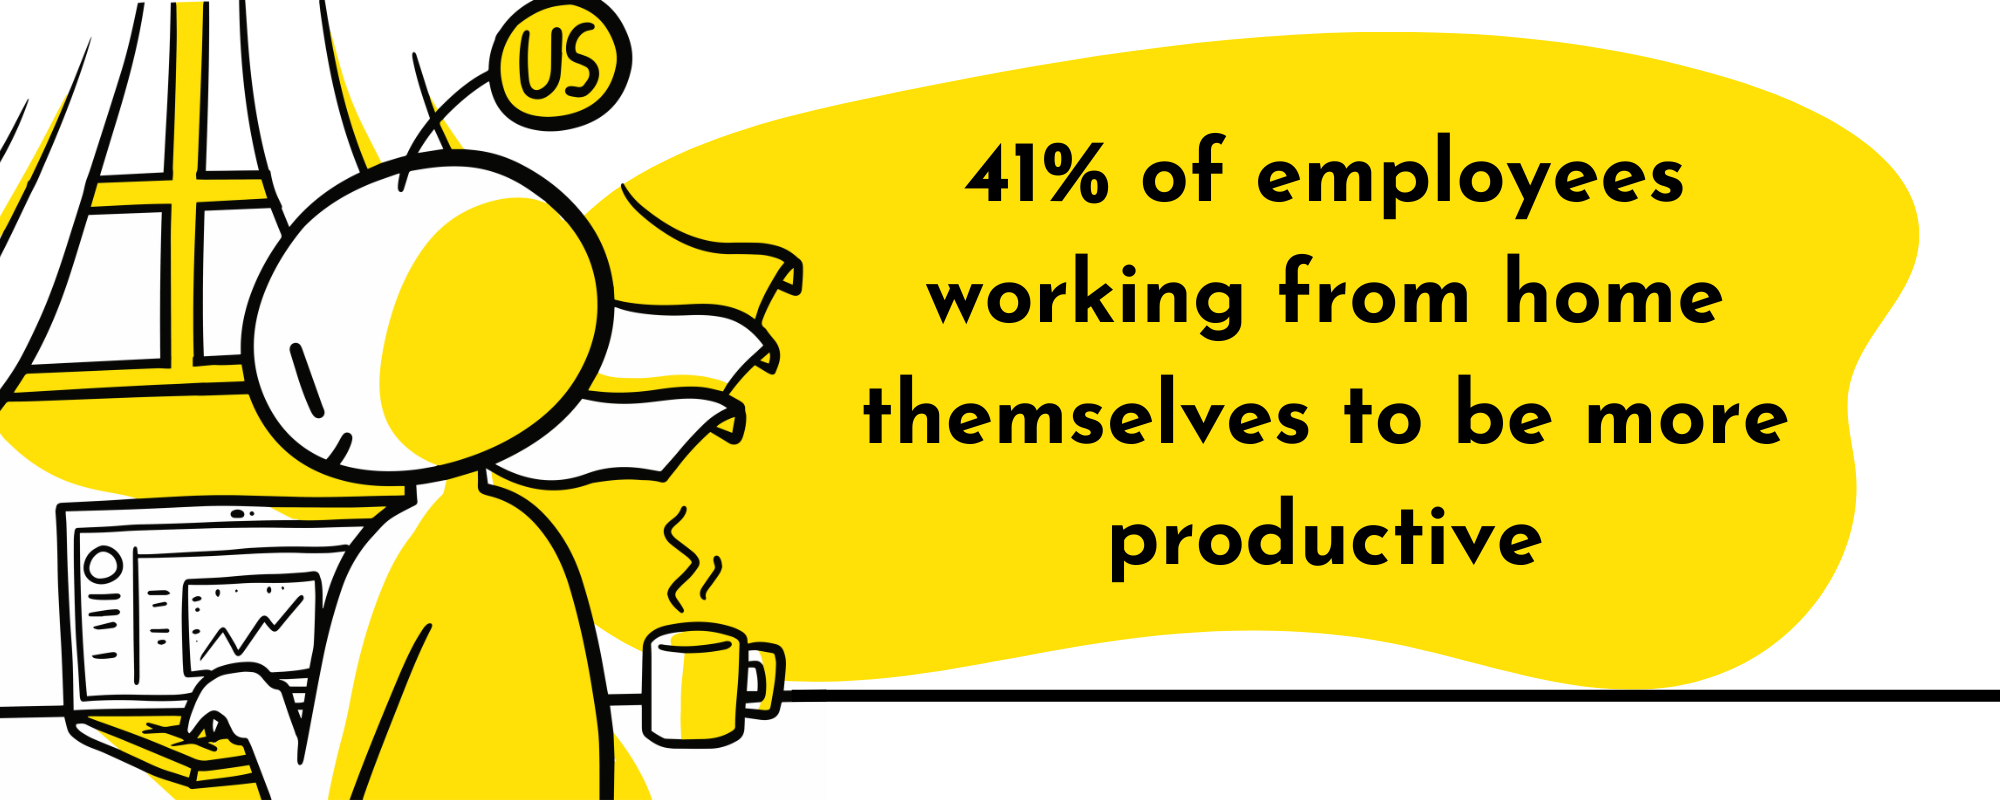 41% of employees working-from-home themselves to be more productive